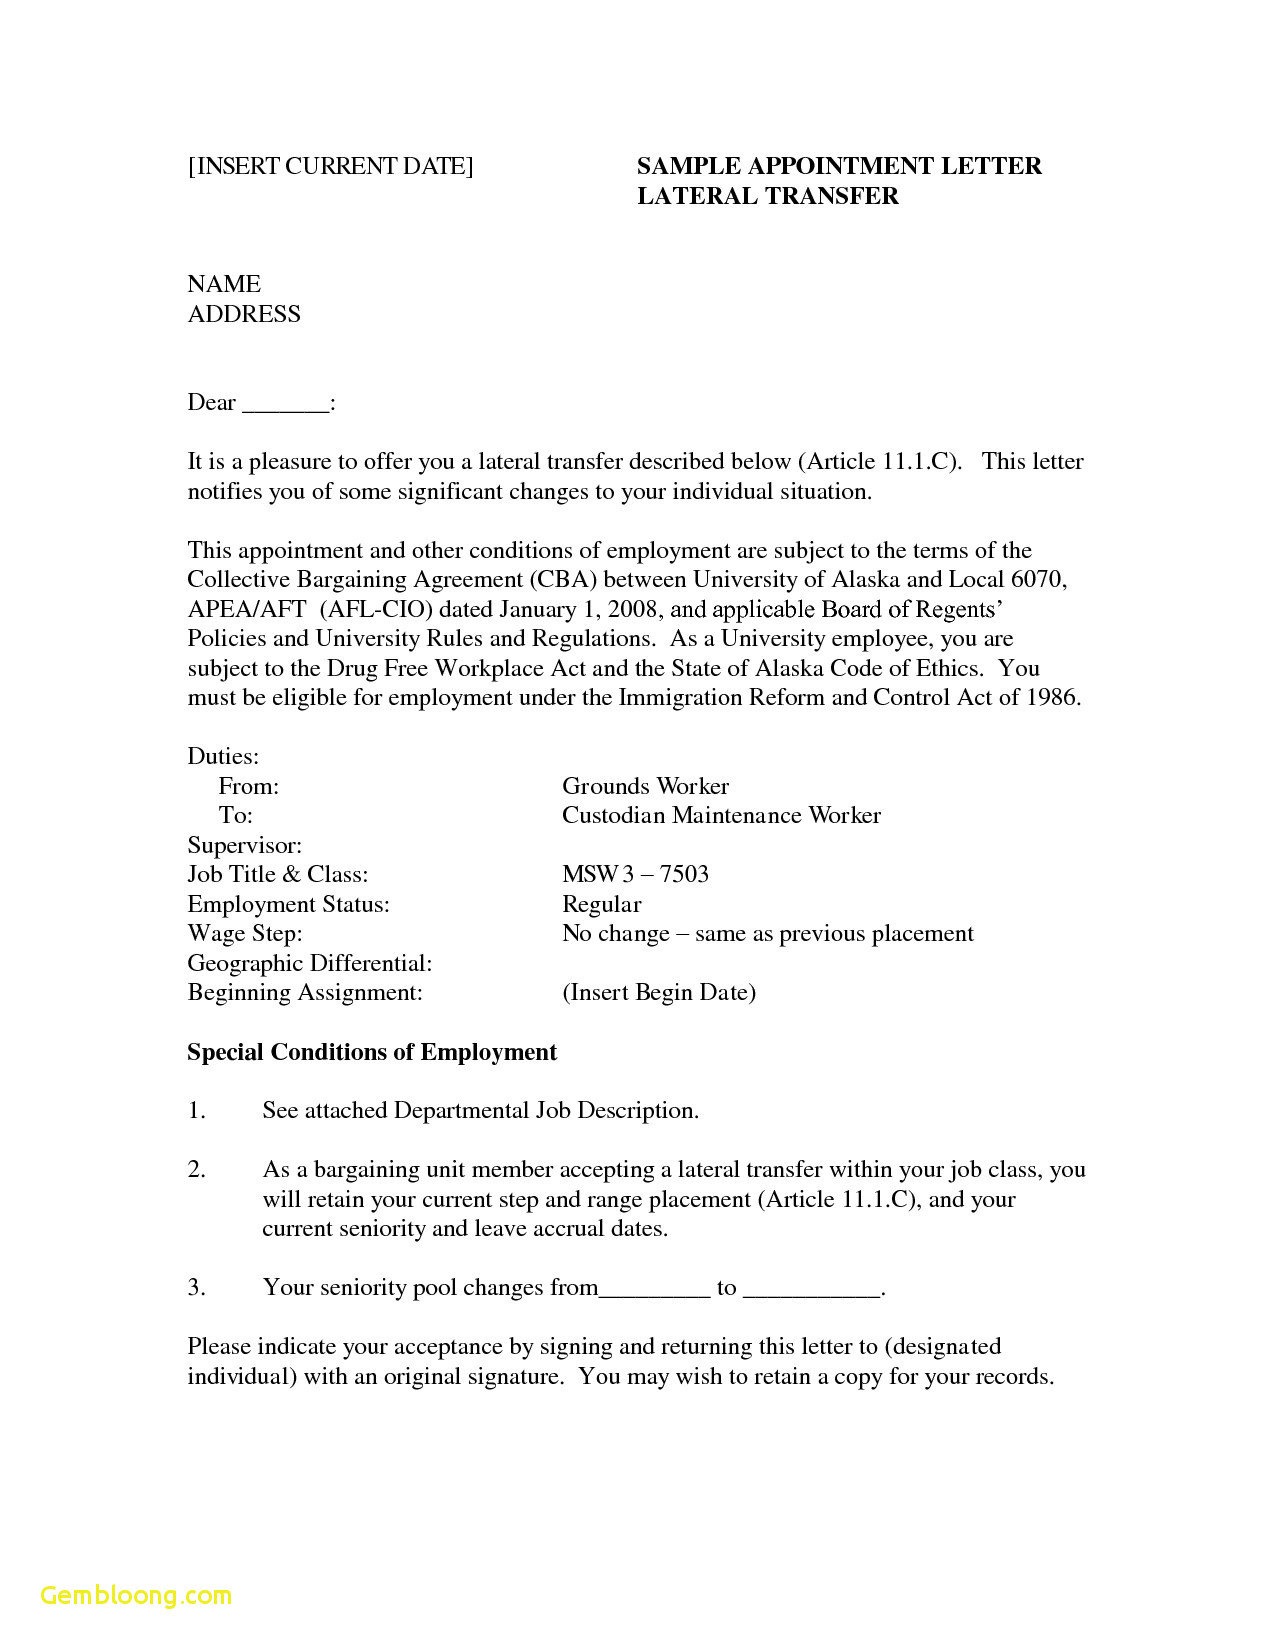 free cover letter template word Collection-Simple Resume Outline Free Download Cover Letter Template Word 2014 Fresh Relocation Cover Letters Od 16-i